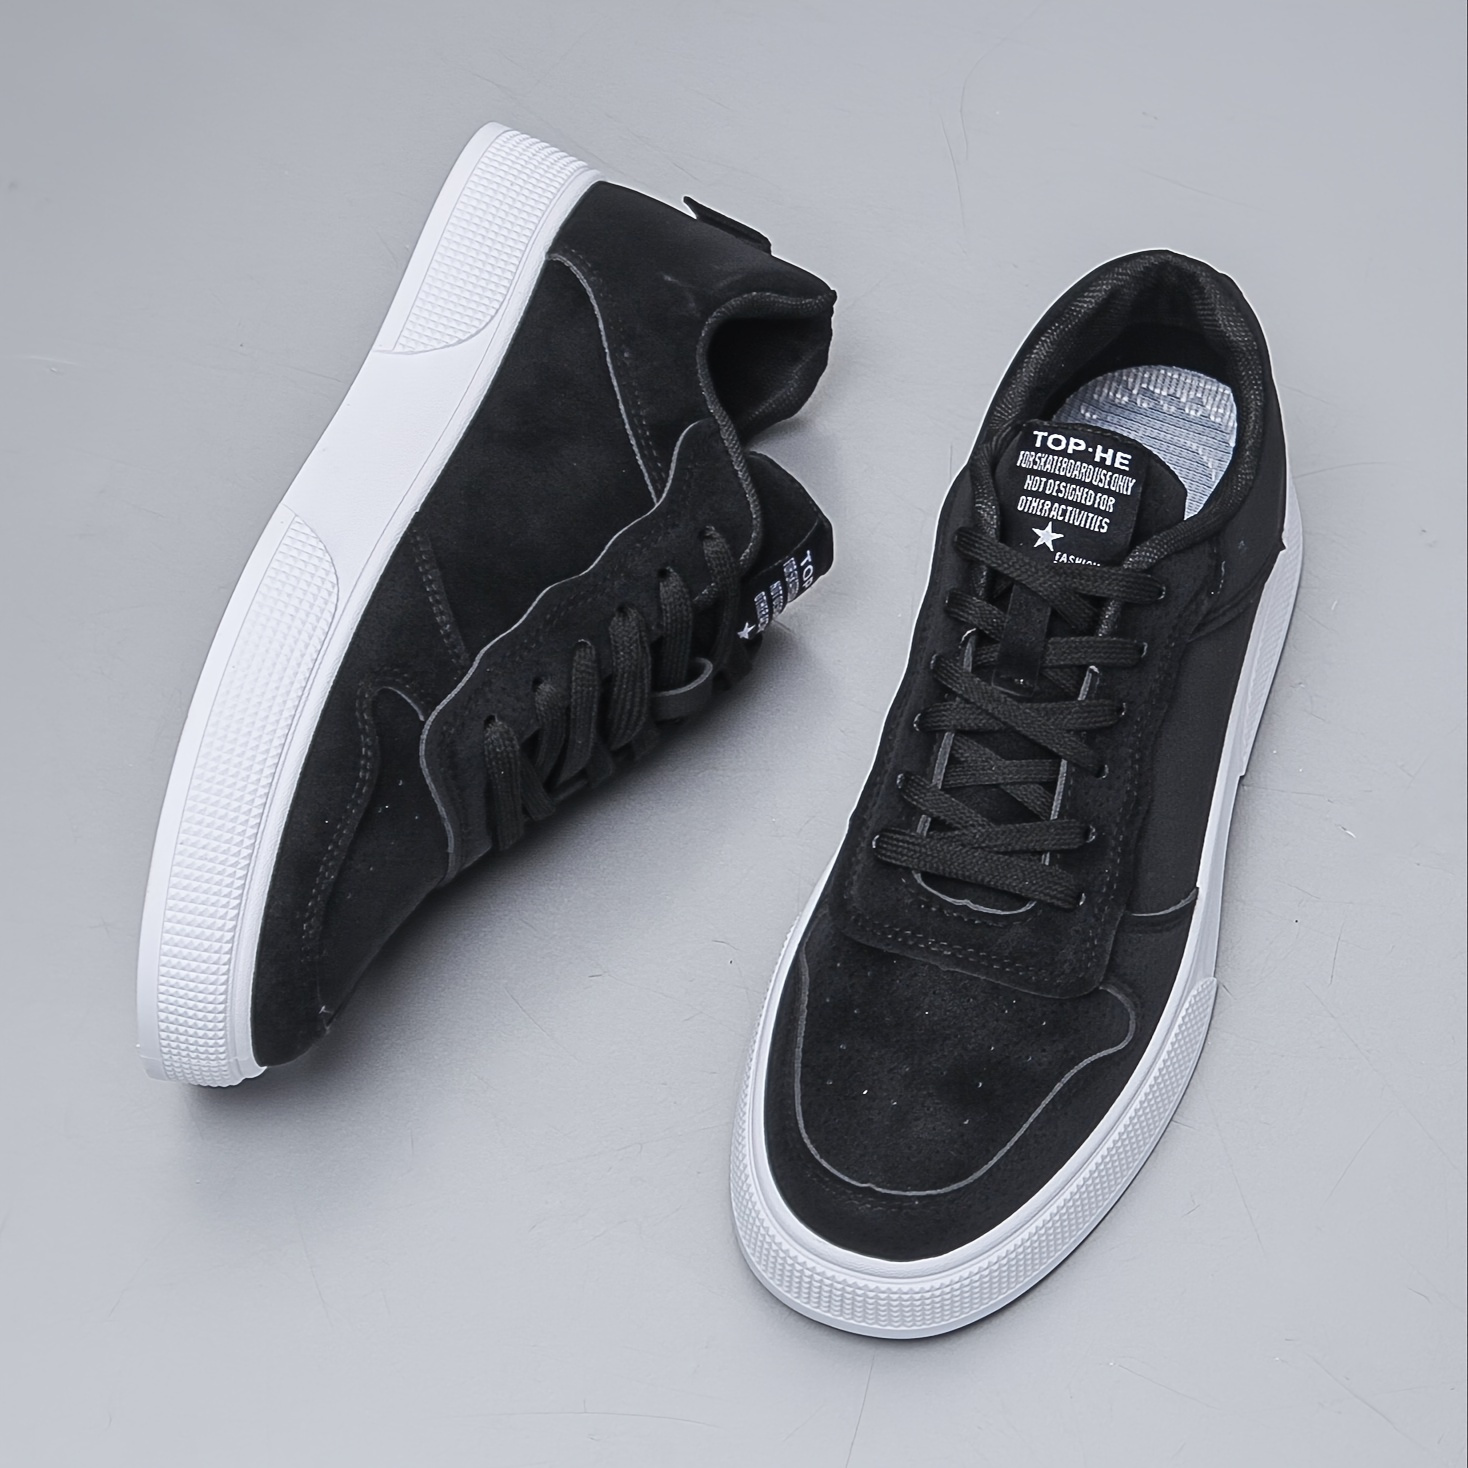 

Men's Trendy Solid Colour Low Top Skateboard Shoes, Comfy Non Slip Casual Lace Up Sneakers For Men's Outdoor Activities